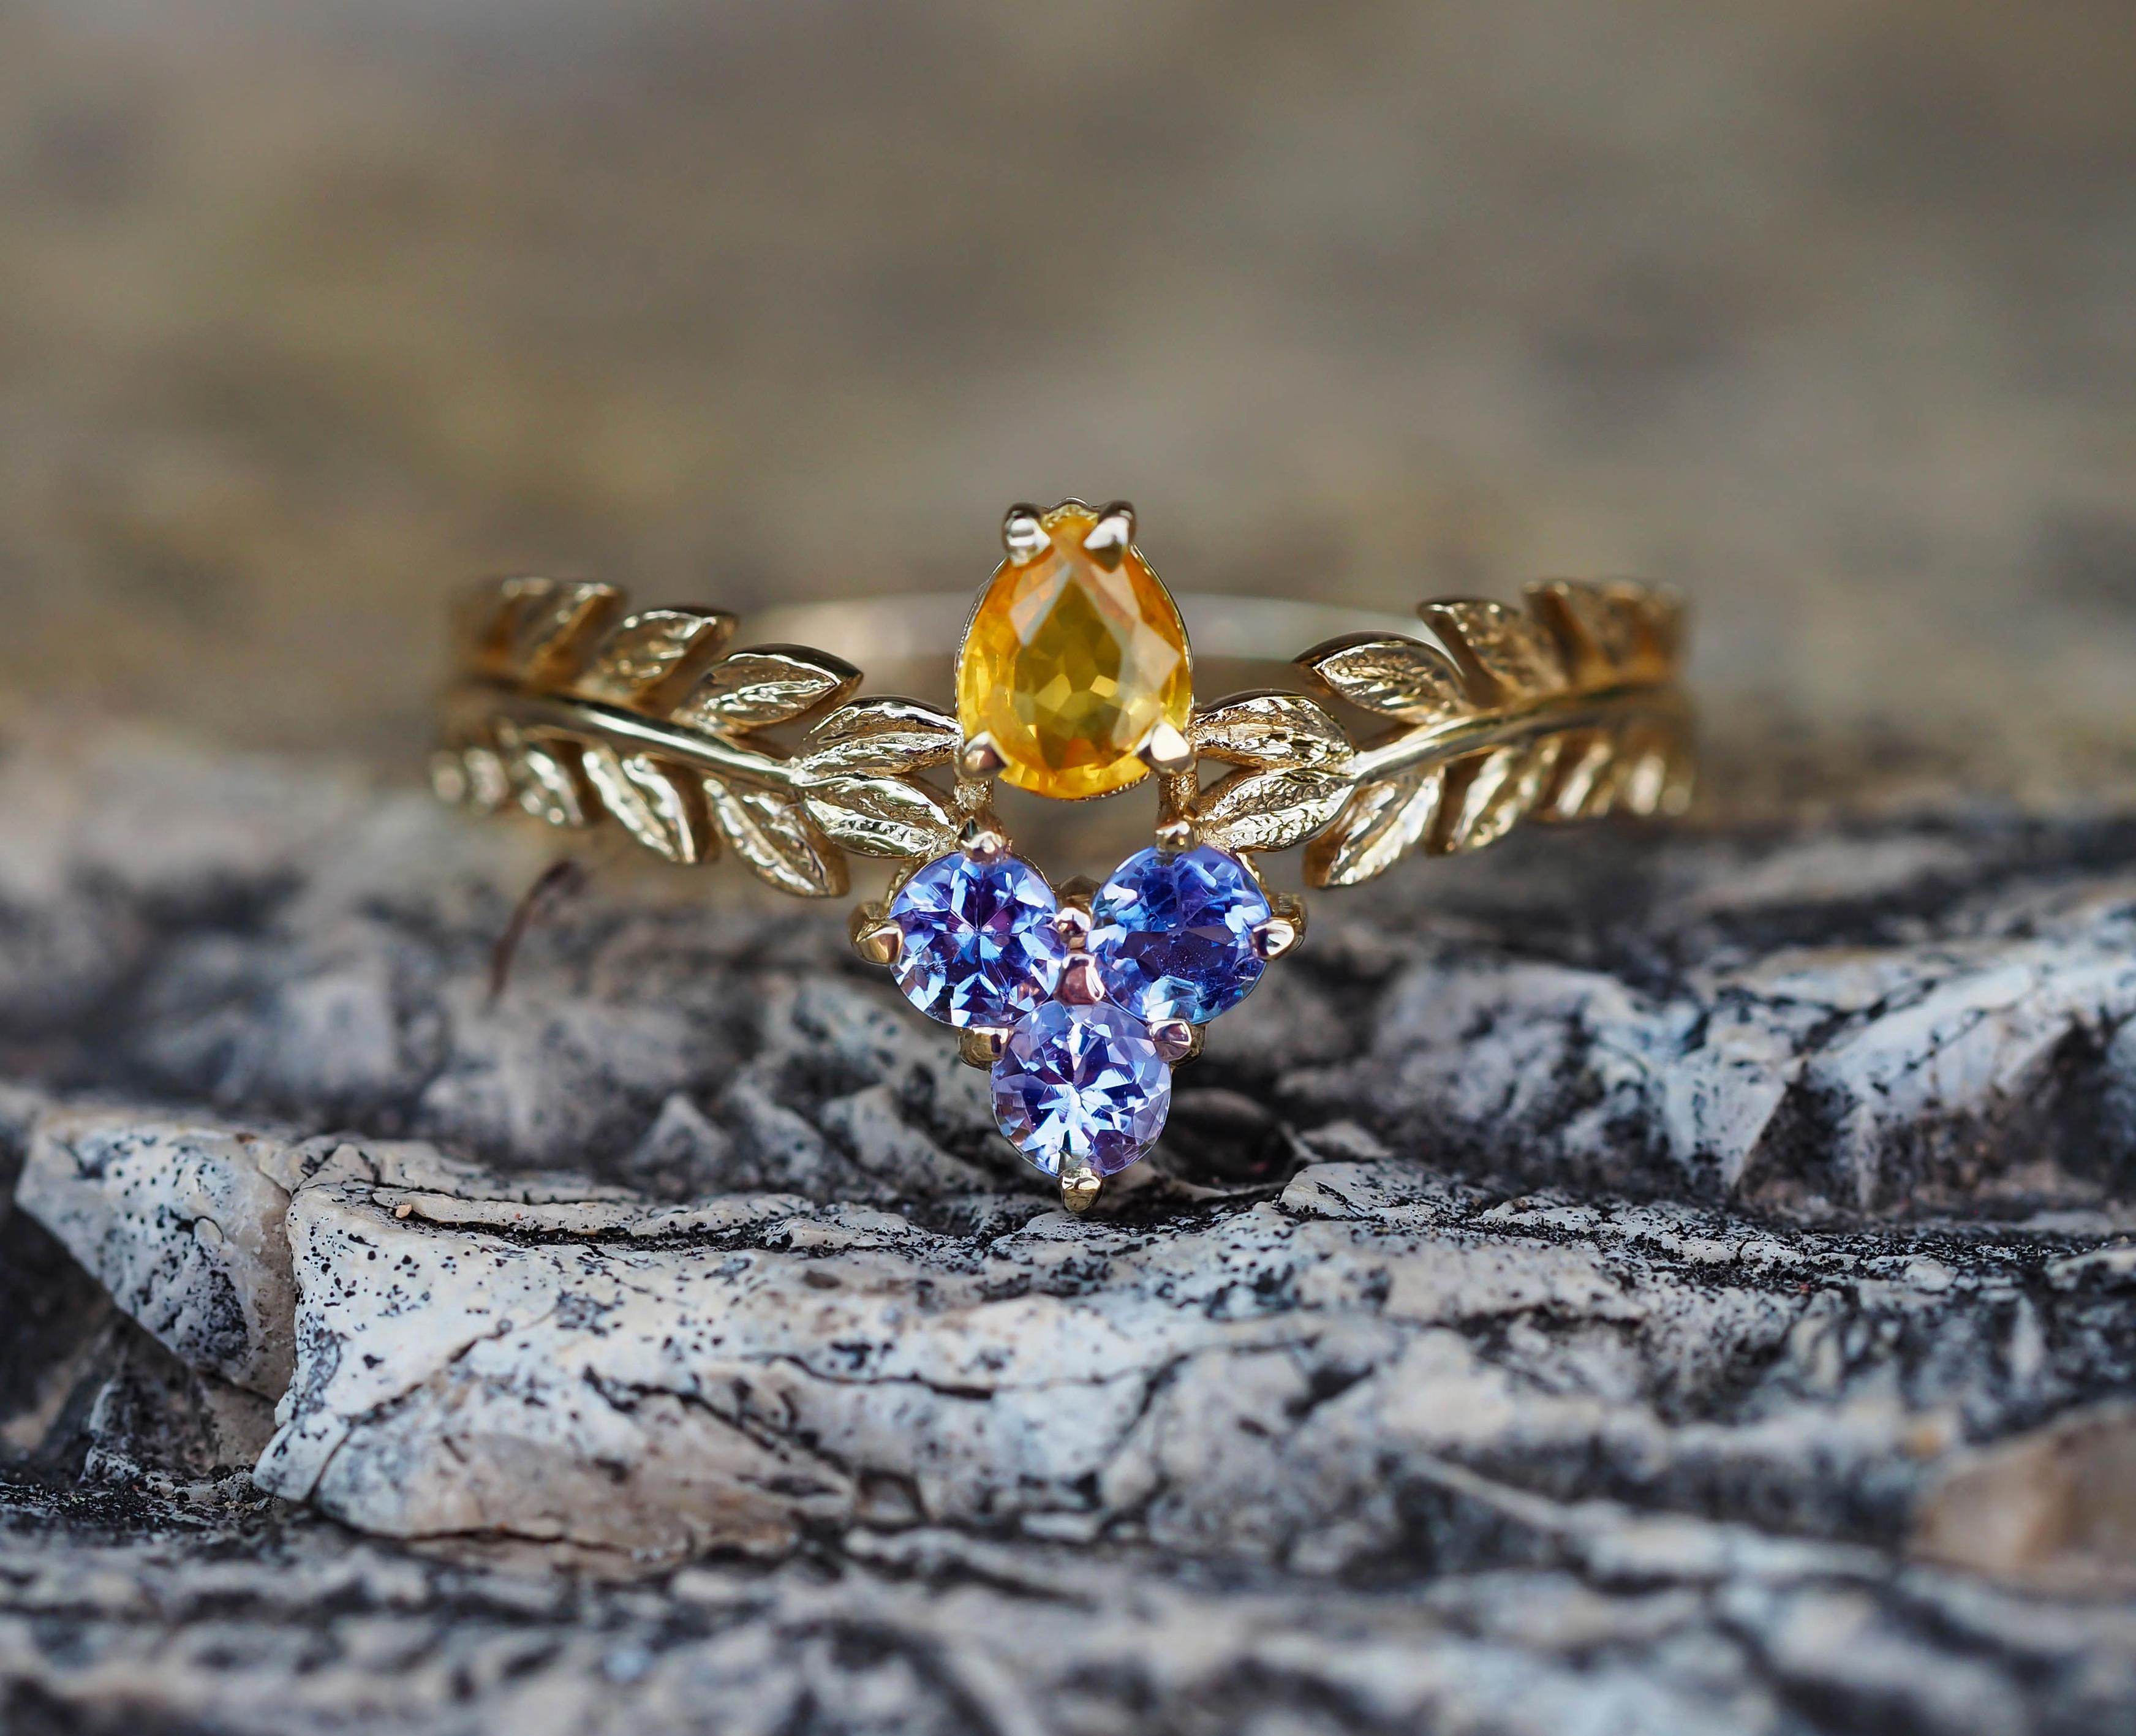 For Sale:  Yellow Sapphire 14k Gold Ring, Olive Leaves Gold Ring 13